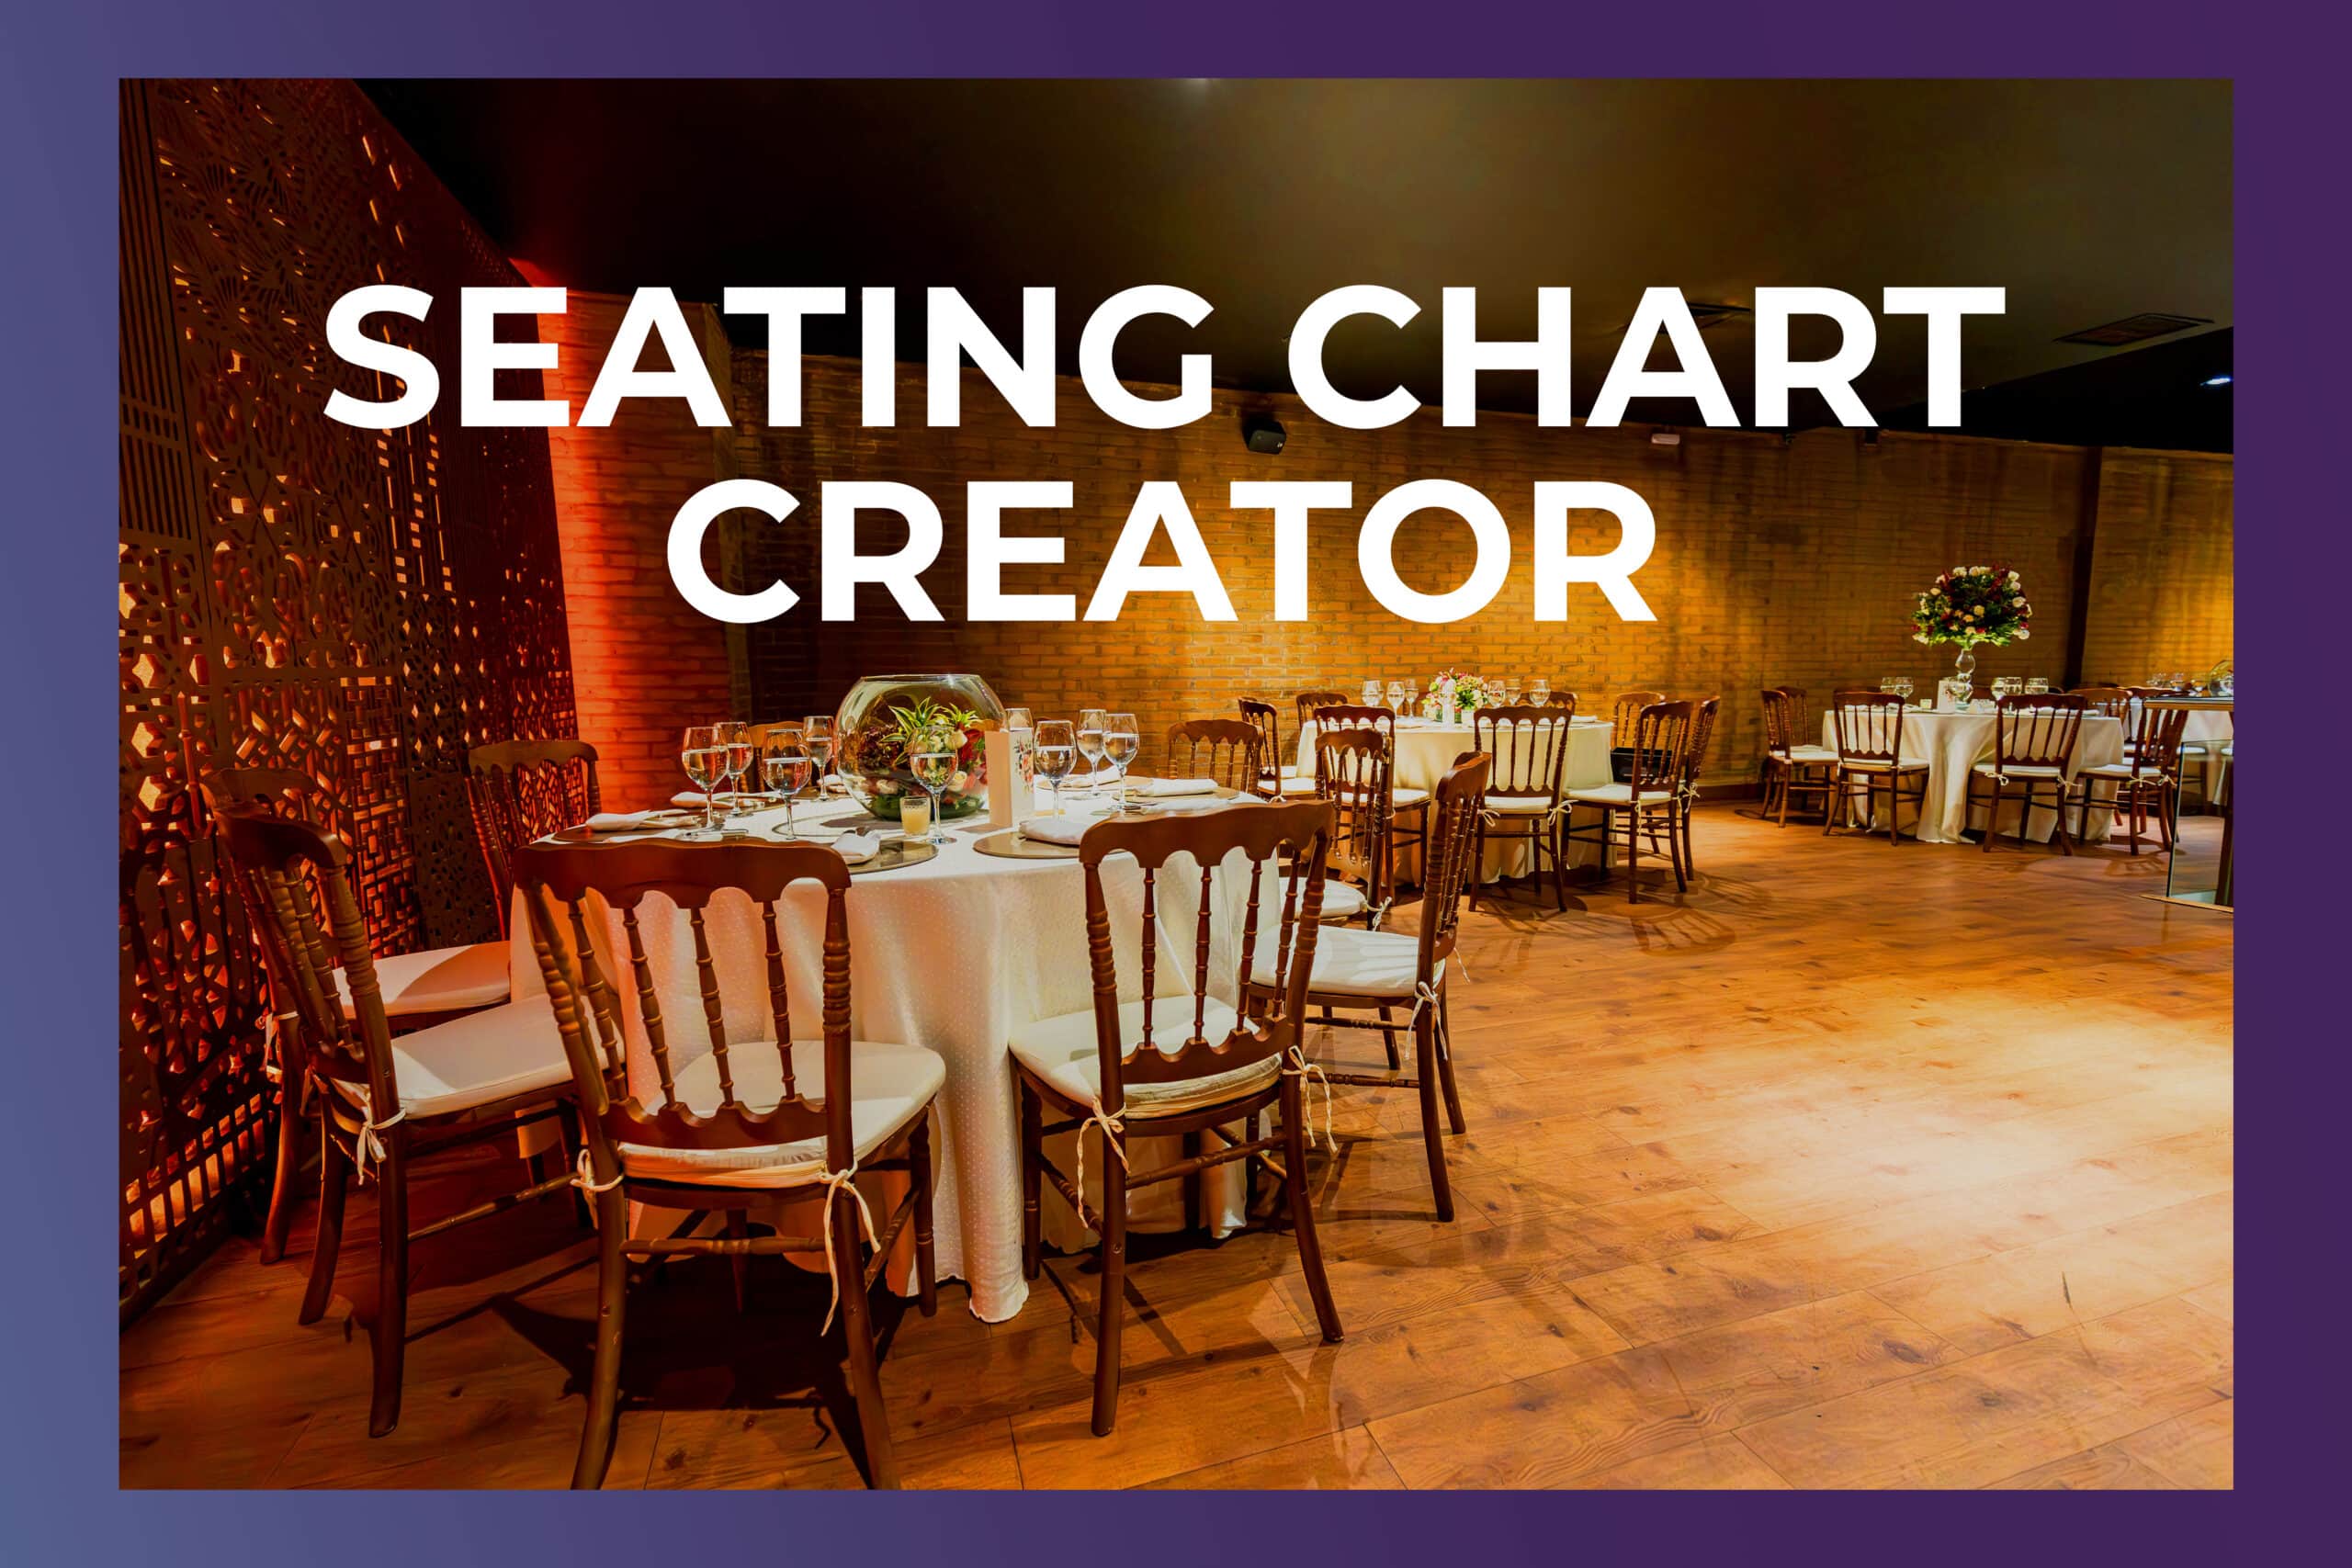 How a seating chart creator can be useful